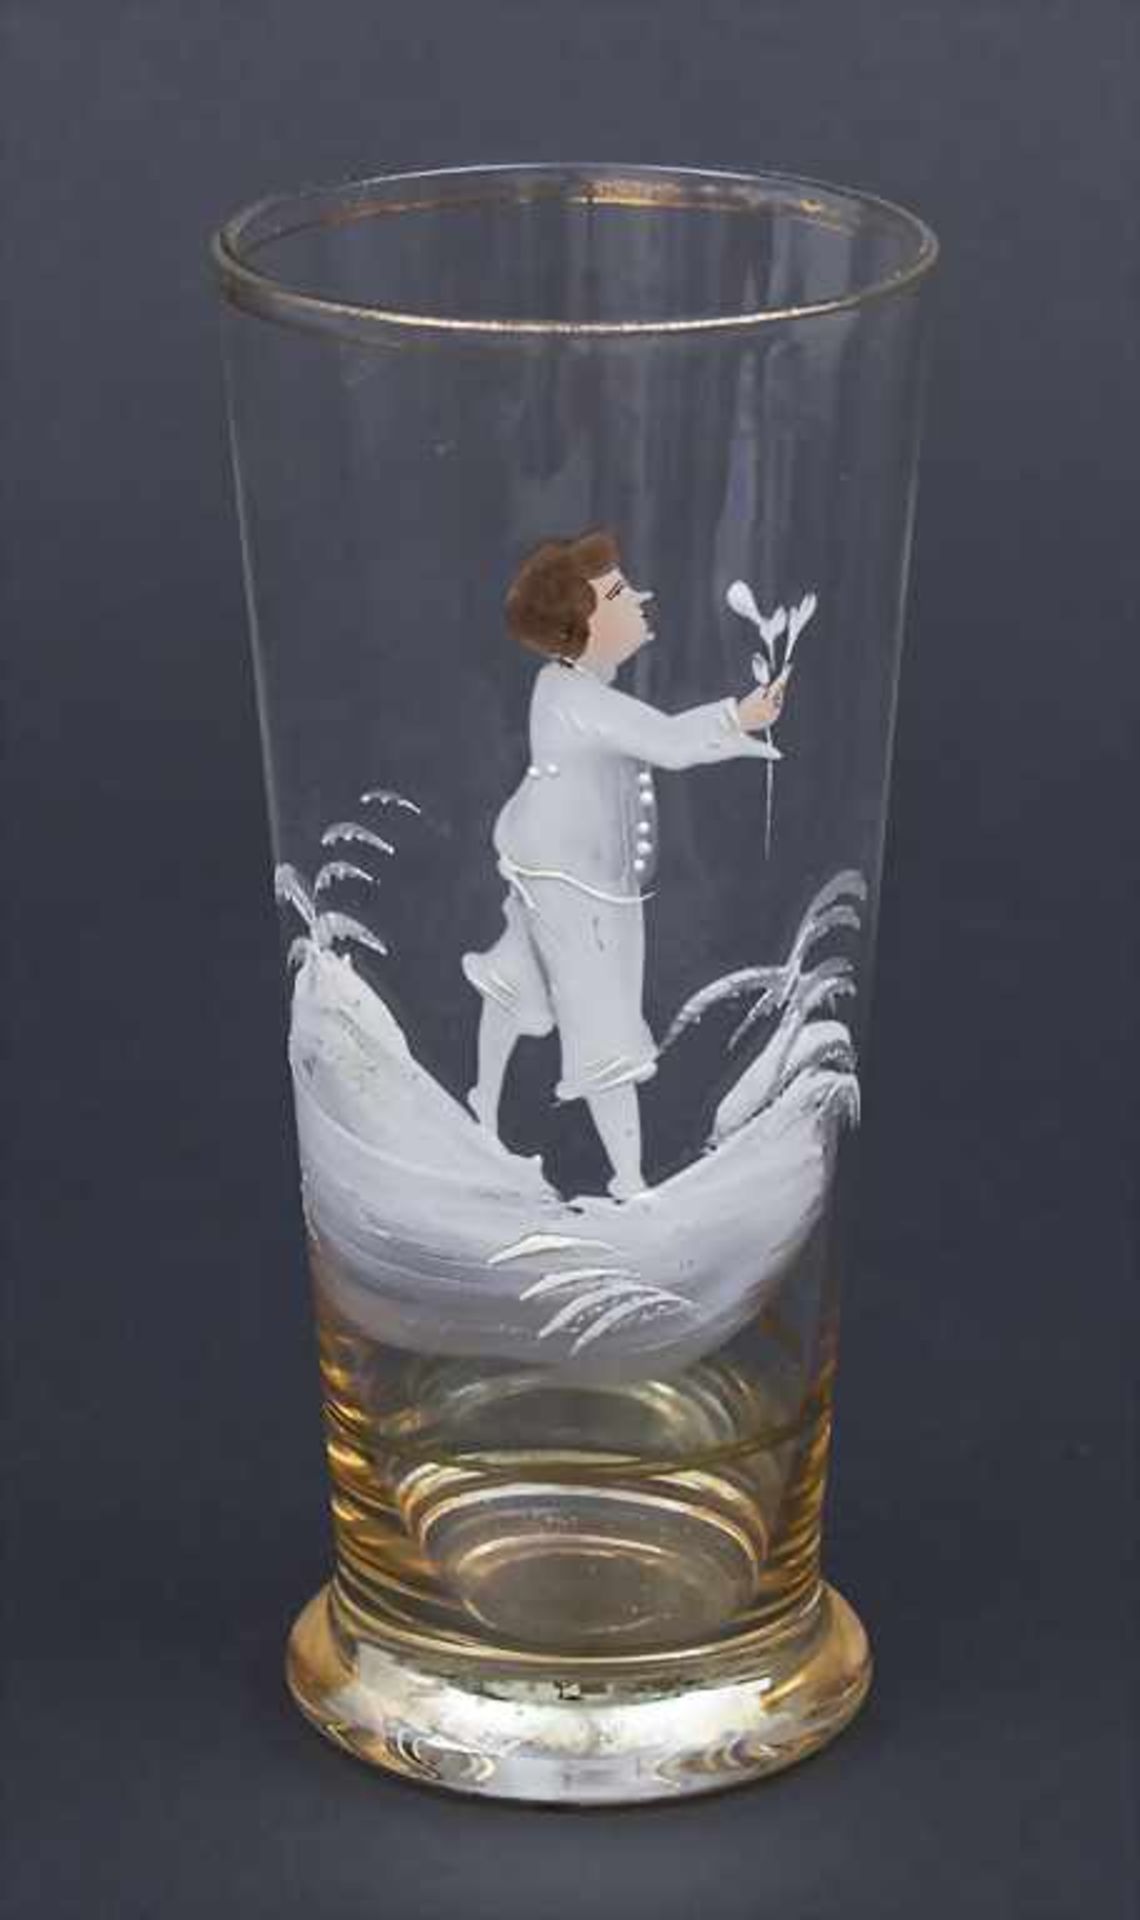 Glas mit Emailmalerei 'Knabe' / A glass with enamel painted boy', Ende 19. Jh. Material: farbloses